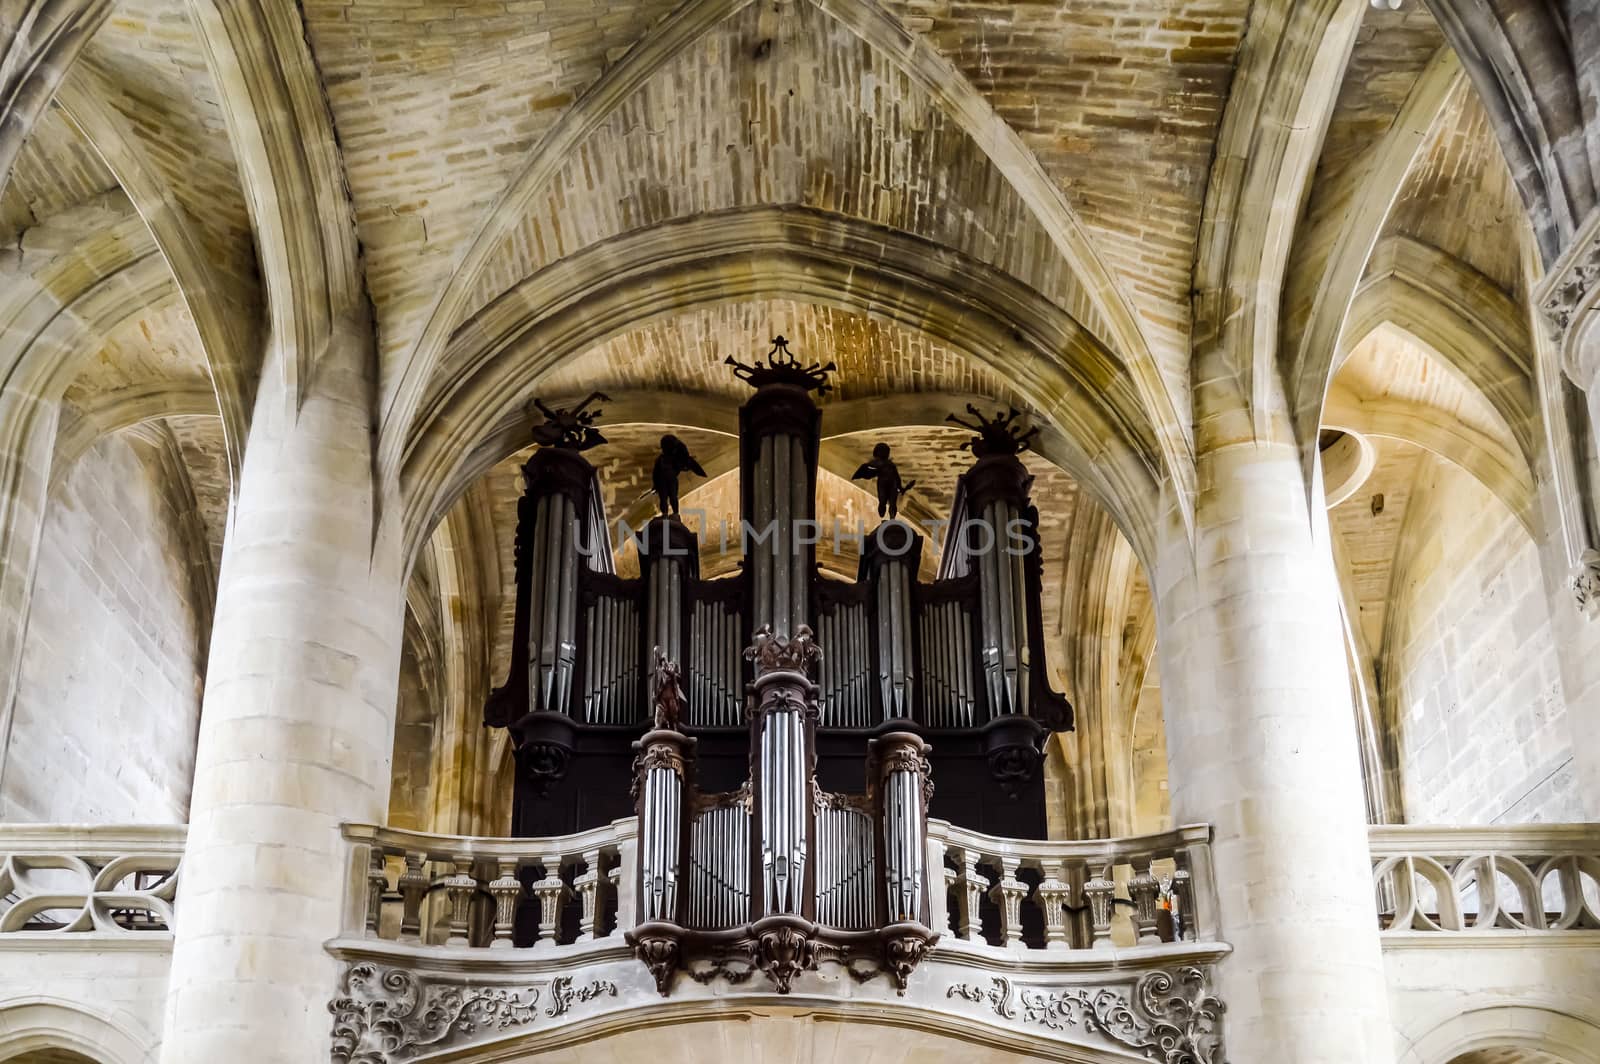 Grandstand organ of the Saint Etienne church by Philou1000